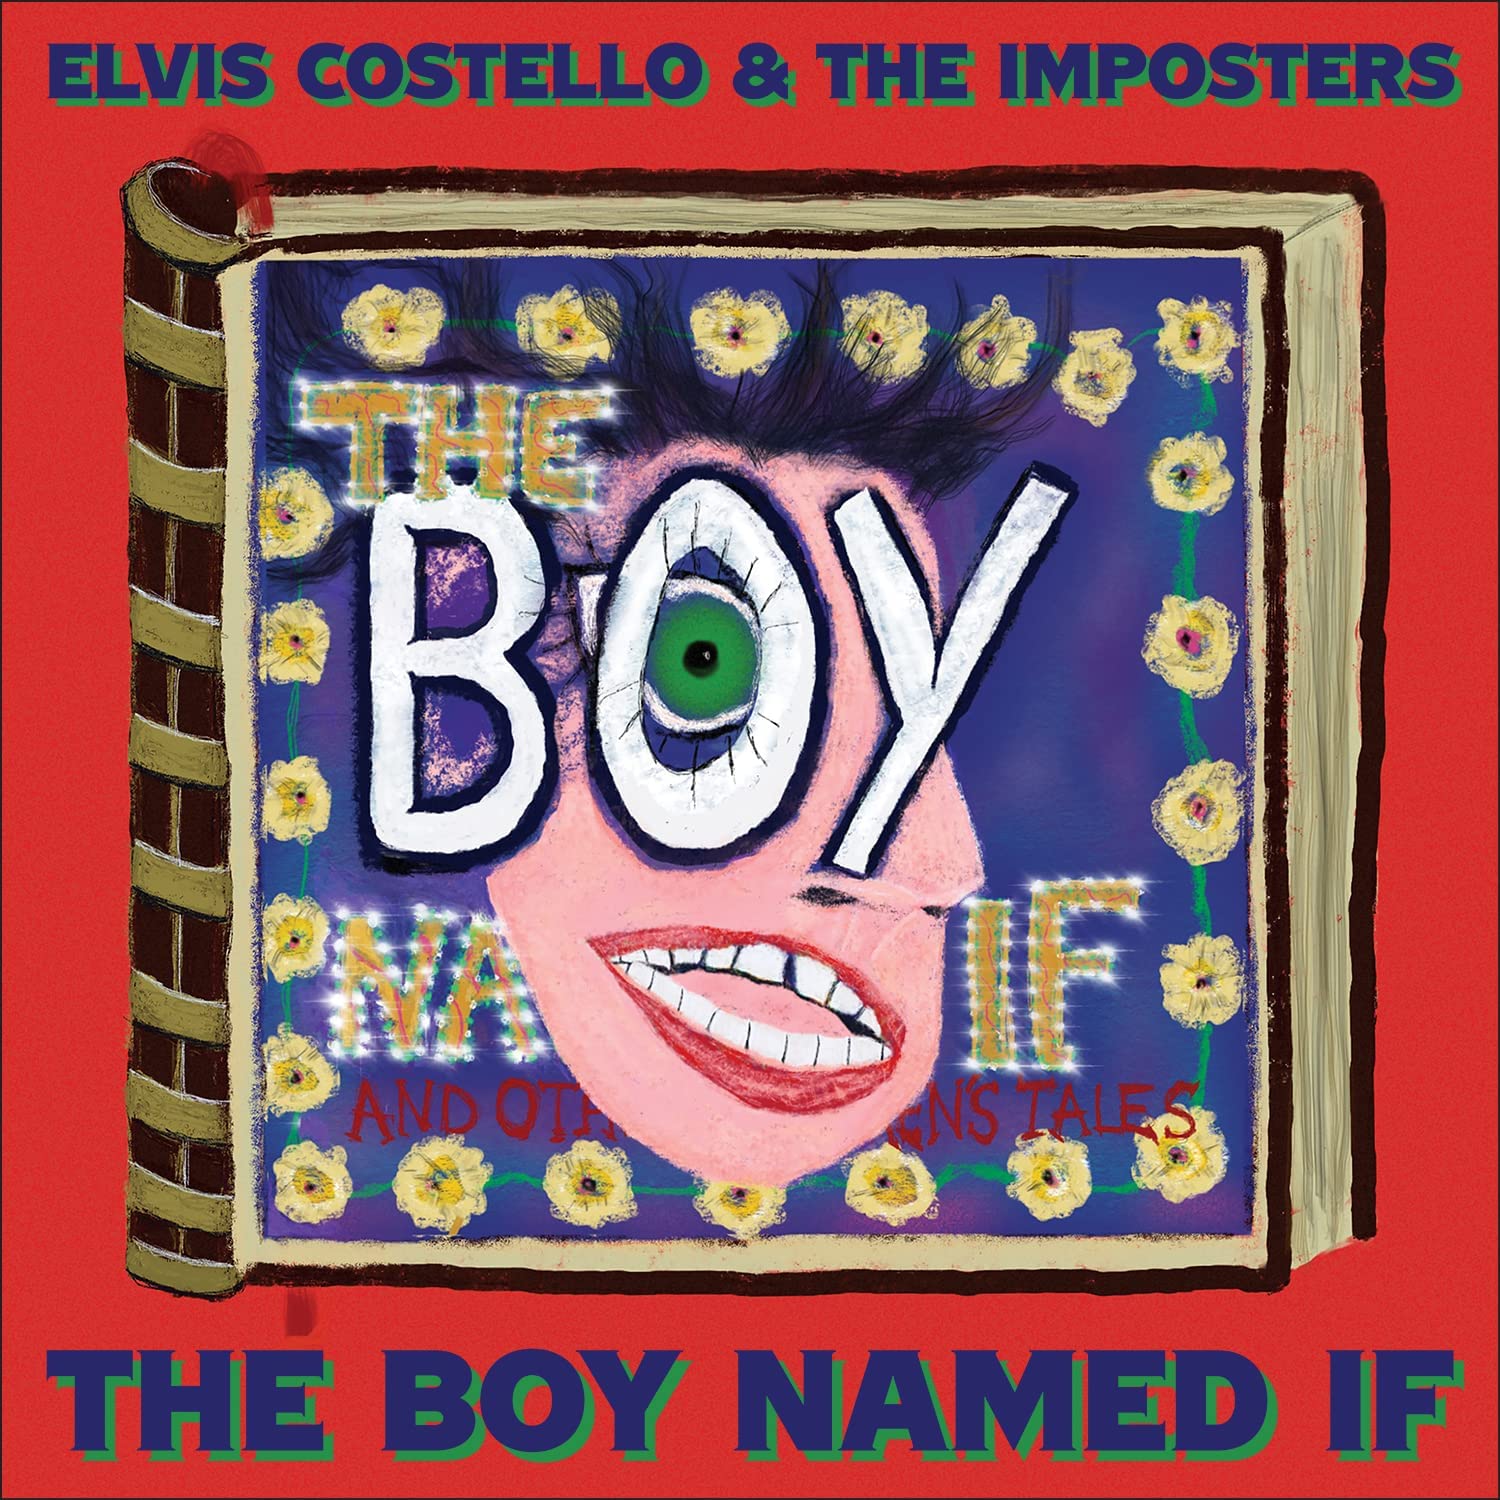 News – Elvis Costello & The Imposters – Magnificent Hurt